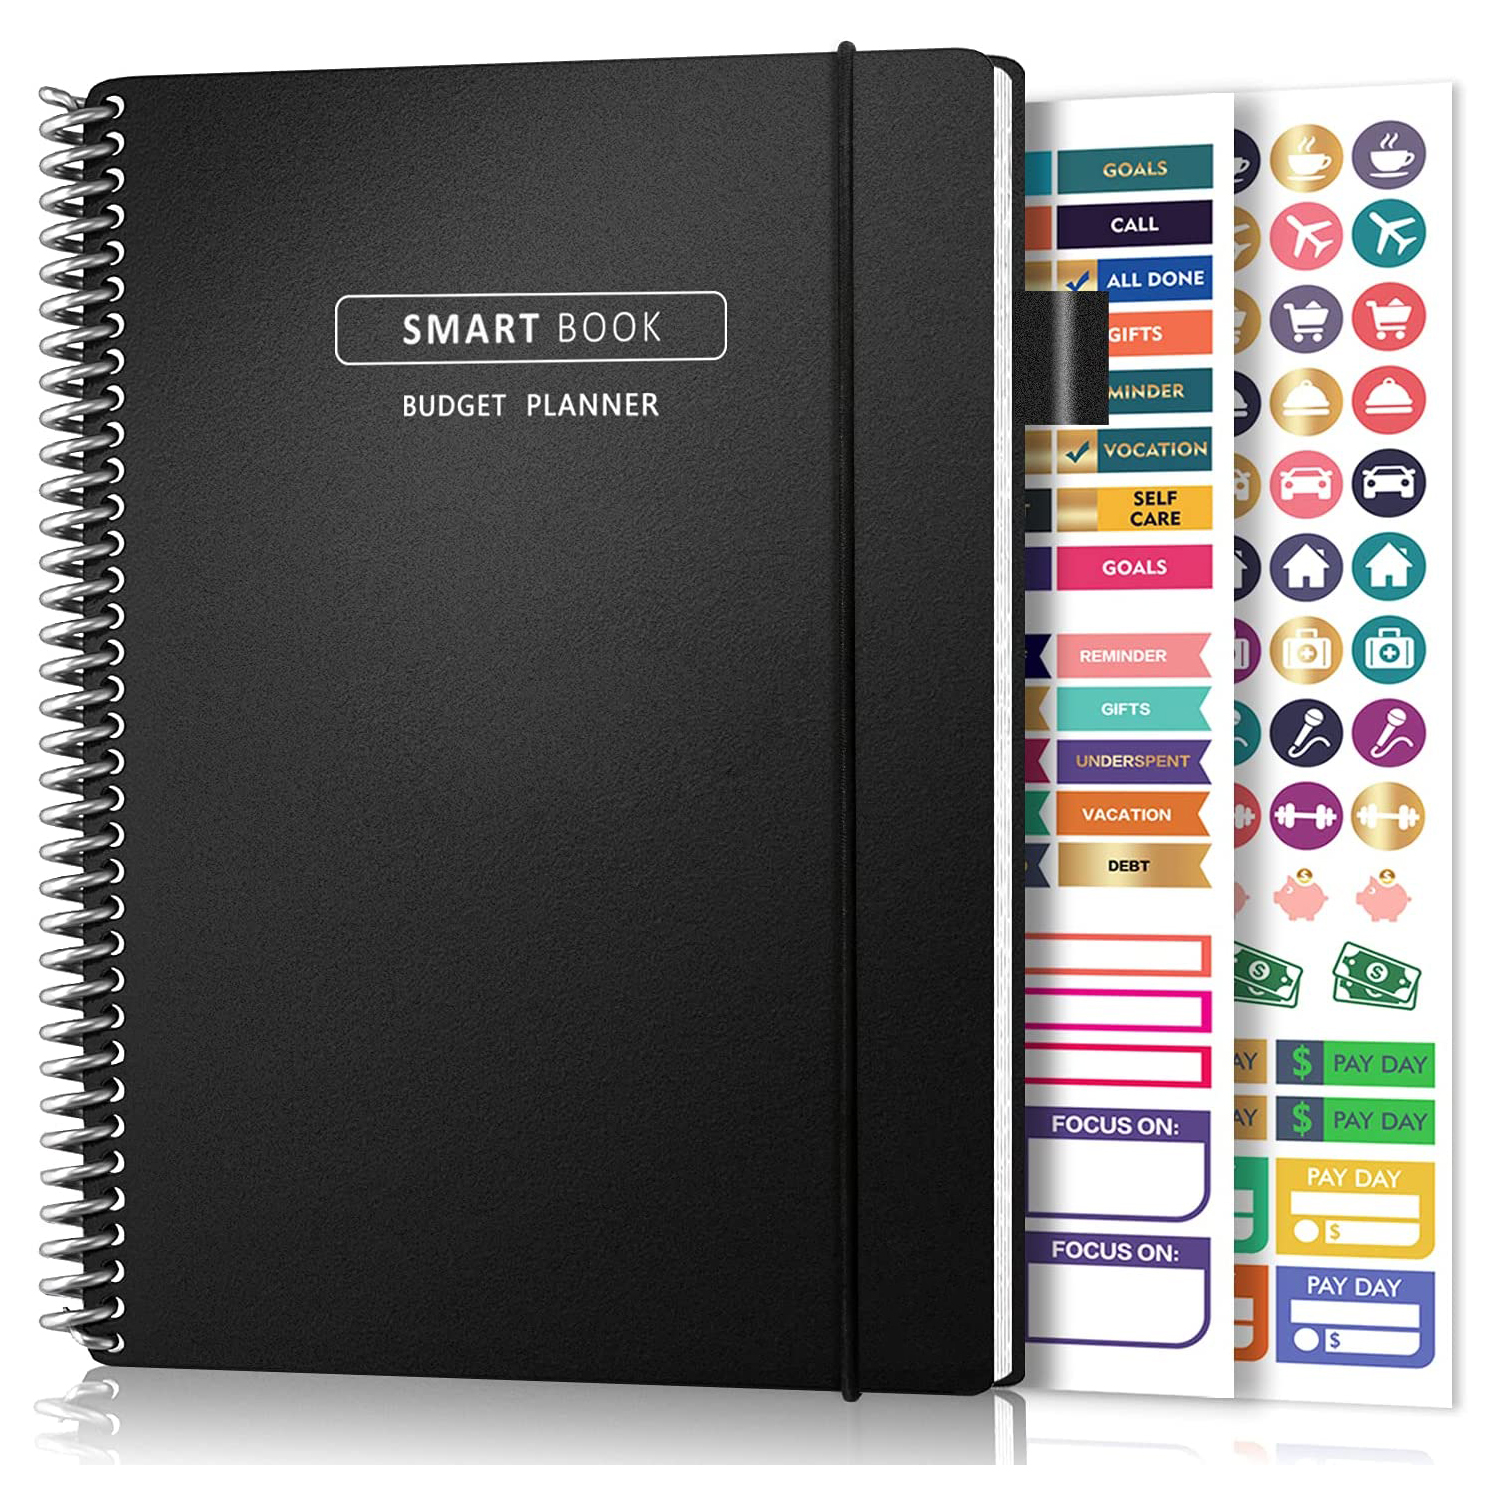 Smart Reusable Budget Planner Financial Organizer with Expense Tracker Notebook